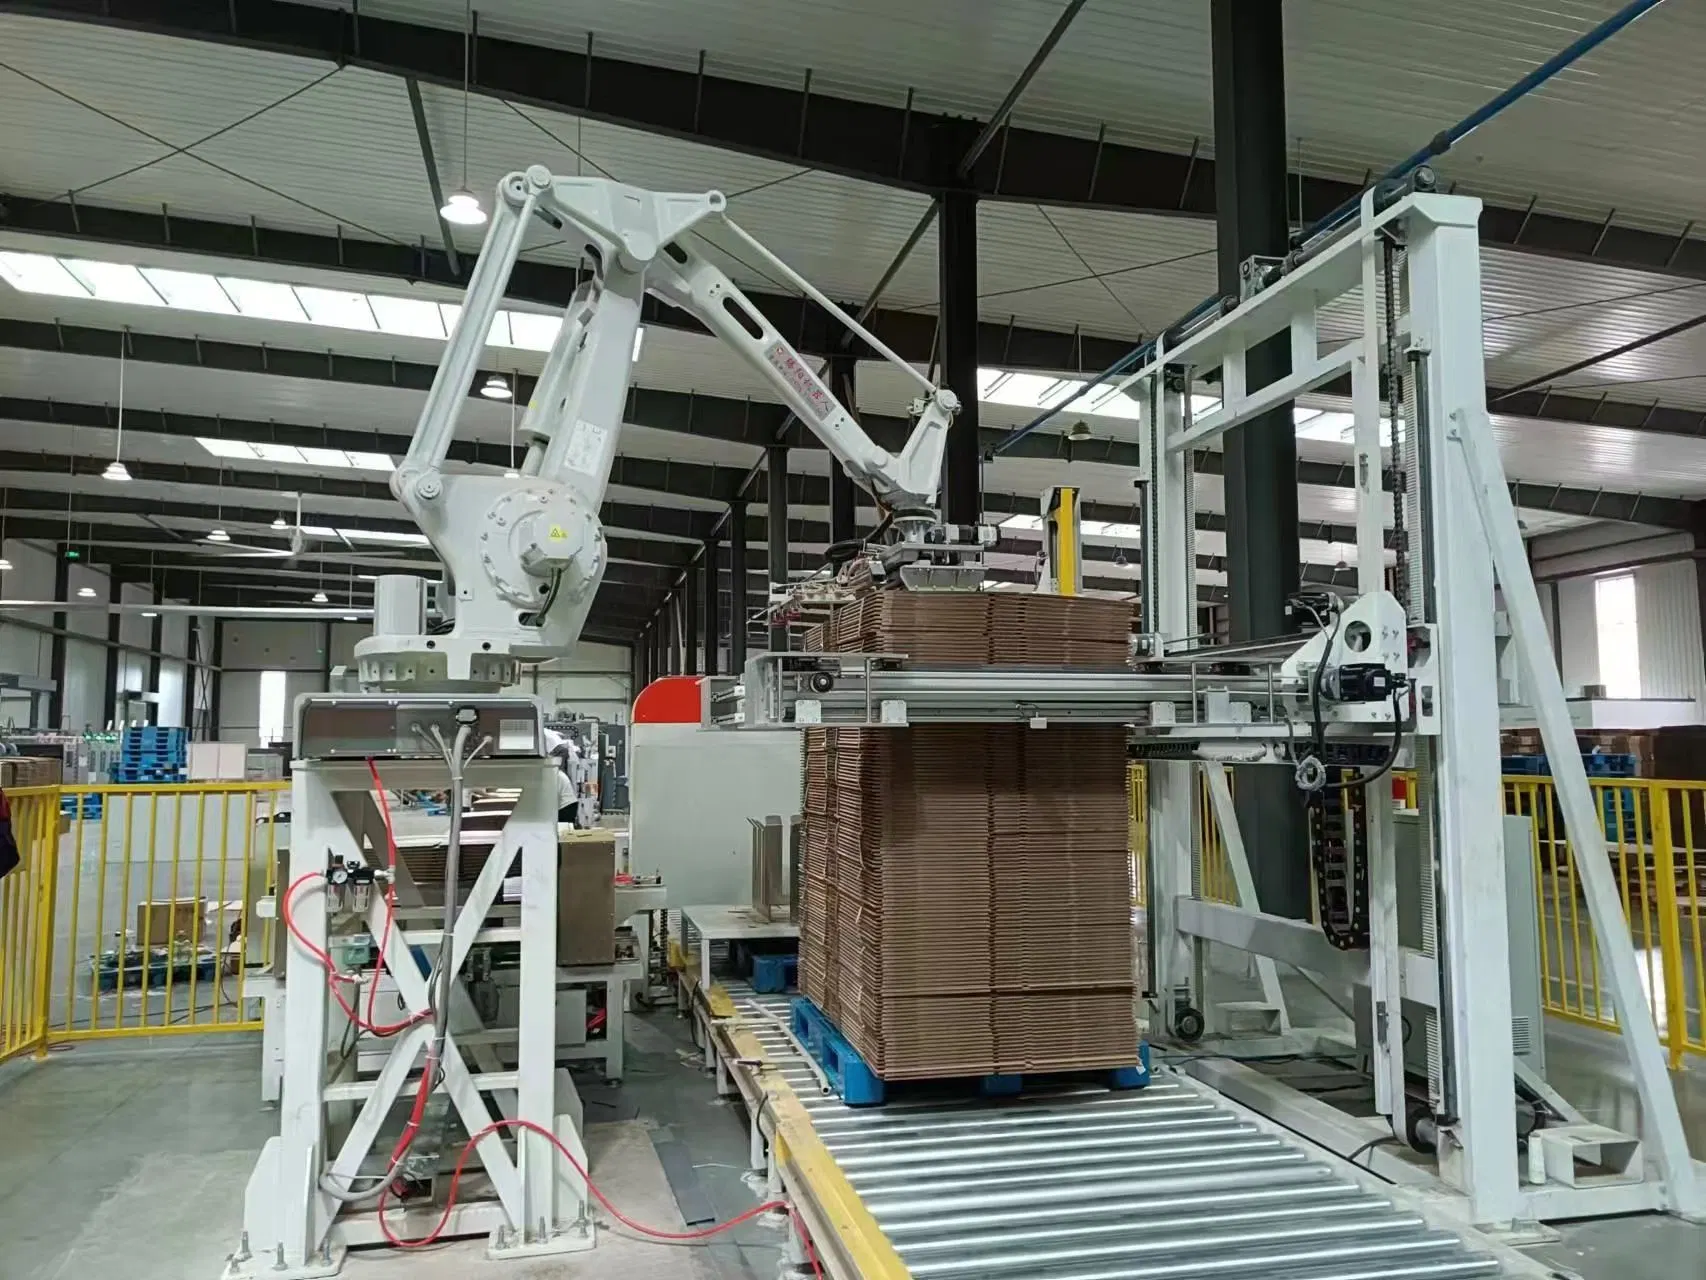 Industrial Gantry Robot Arm Robot Automatic Code Box Handling Equipment Hot New Price High Quality Service